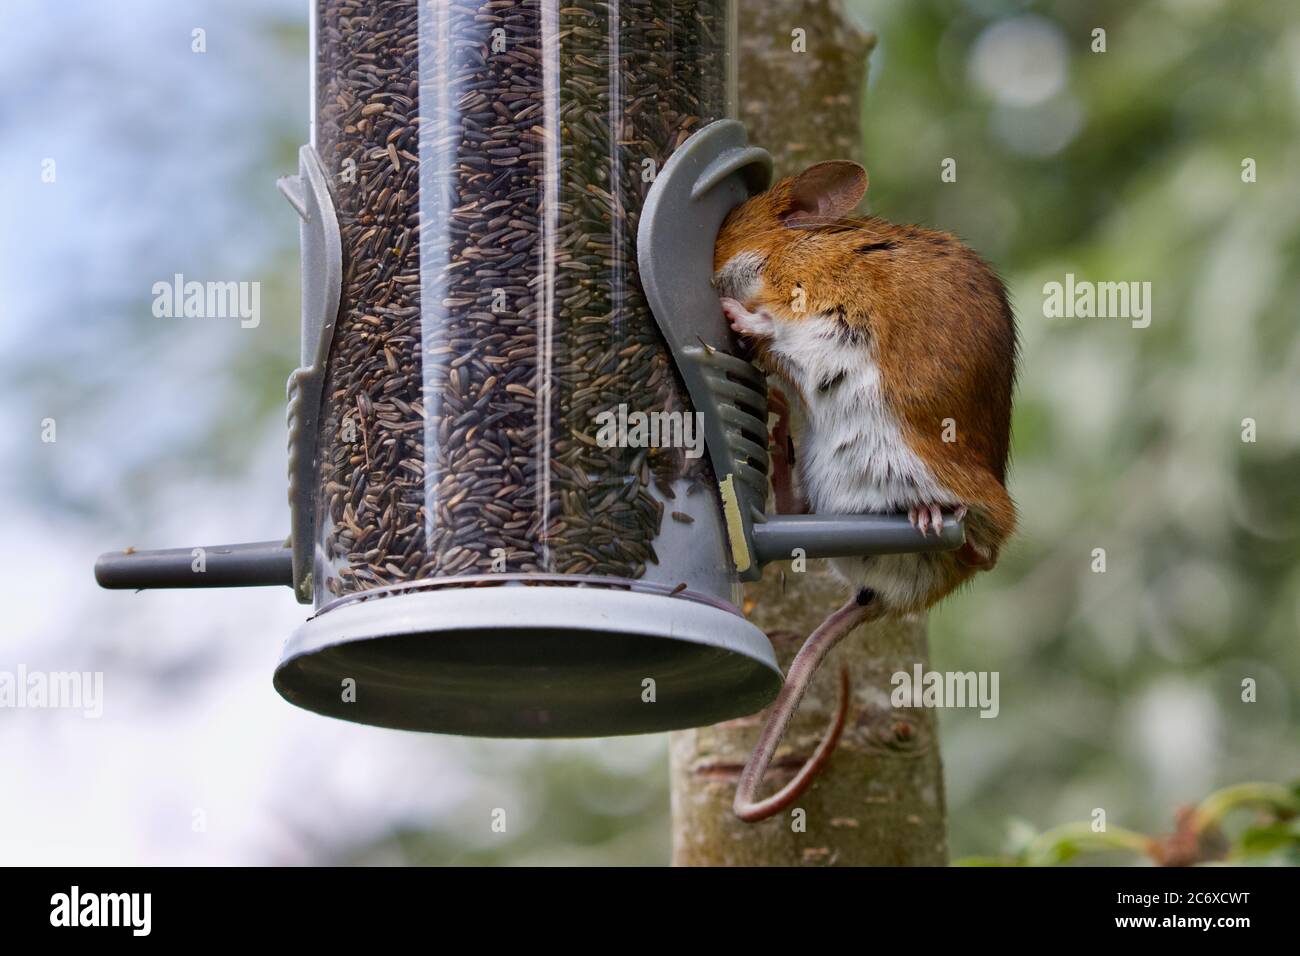 Mouse up a tree feeding on nyjer seeds Stock Photo